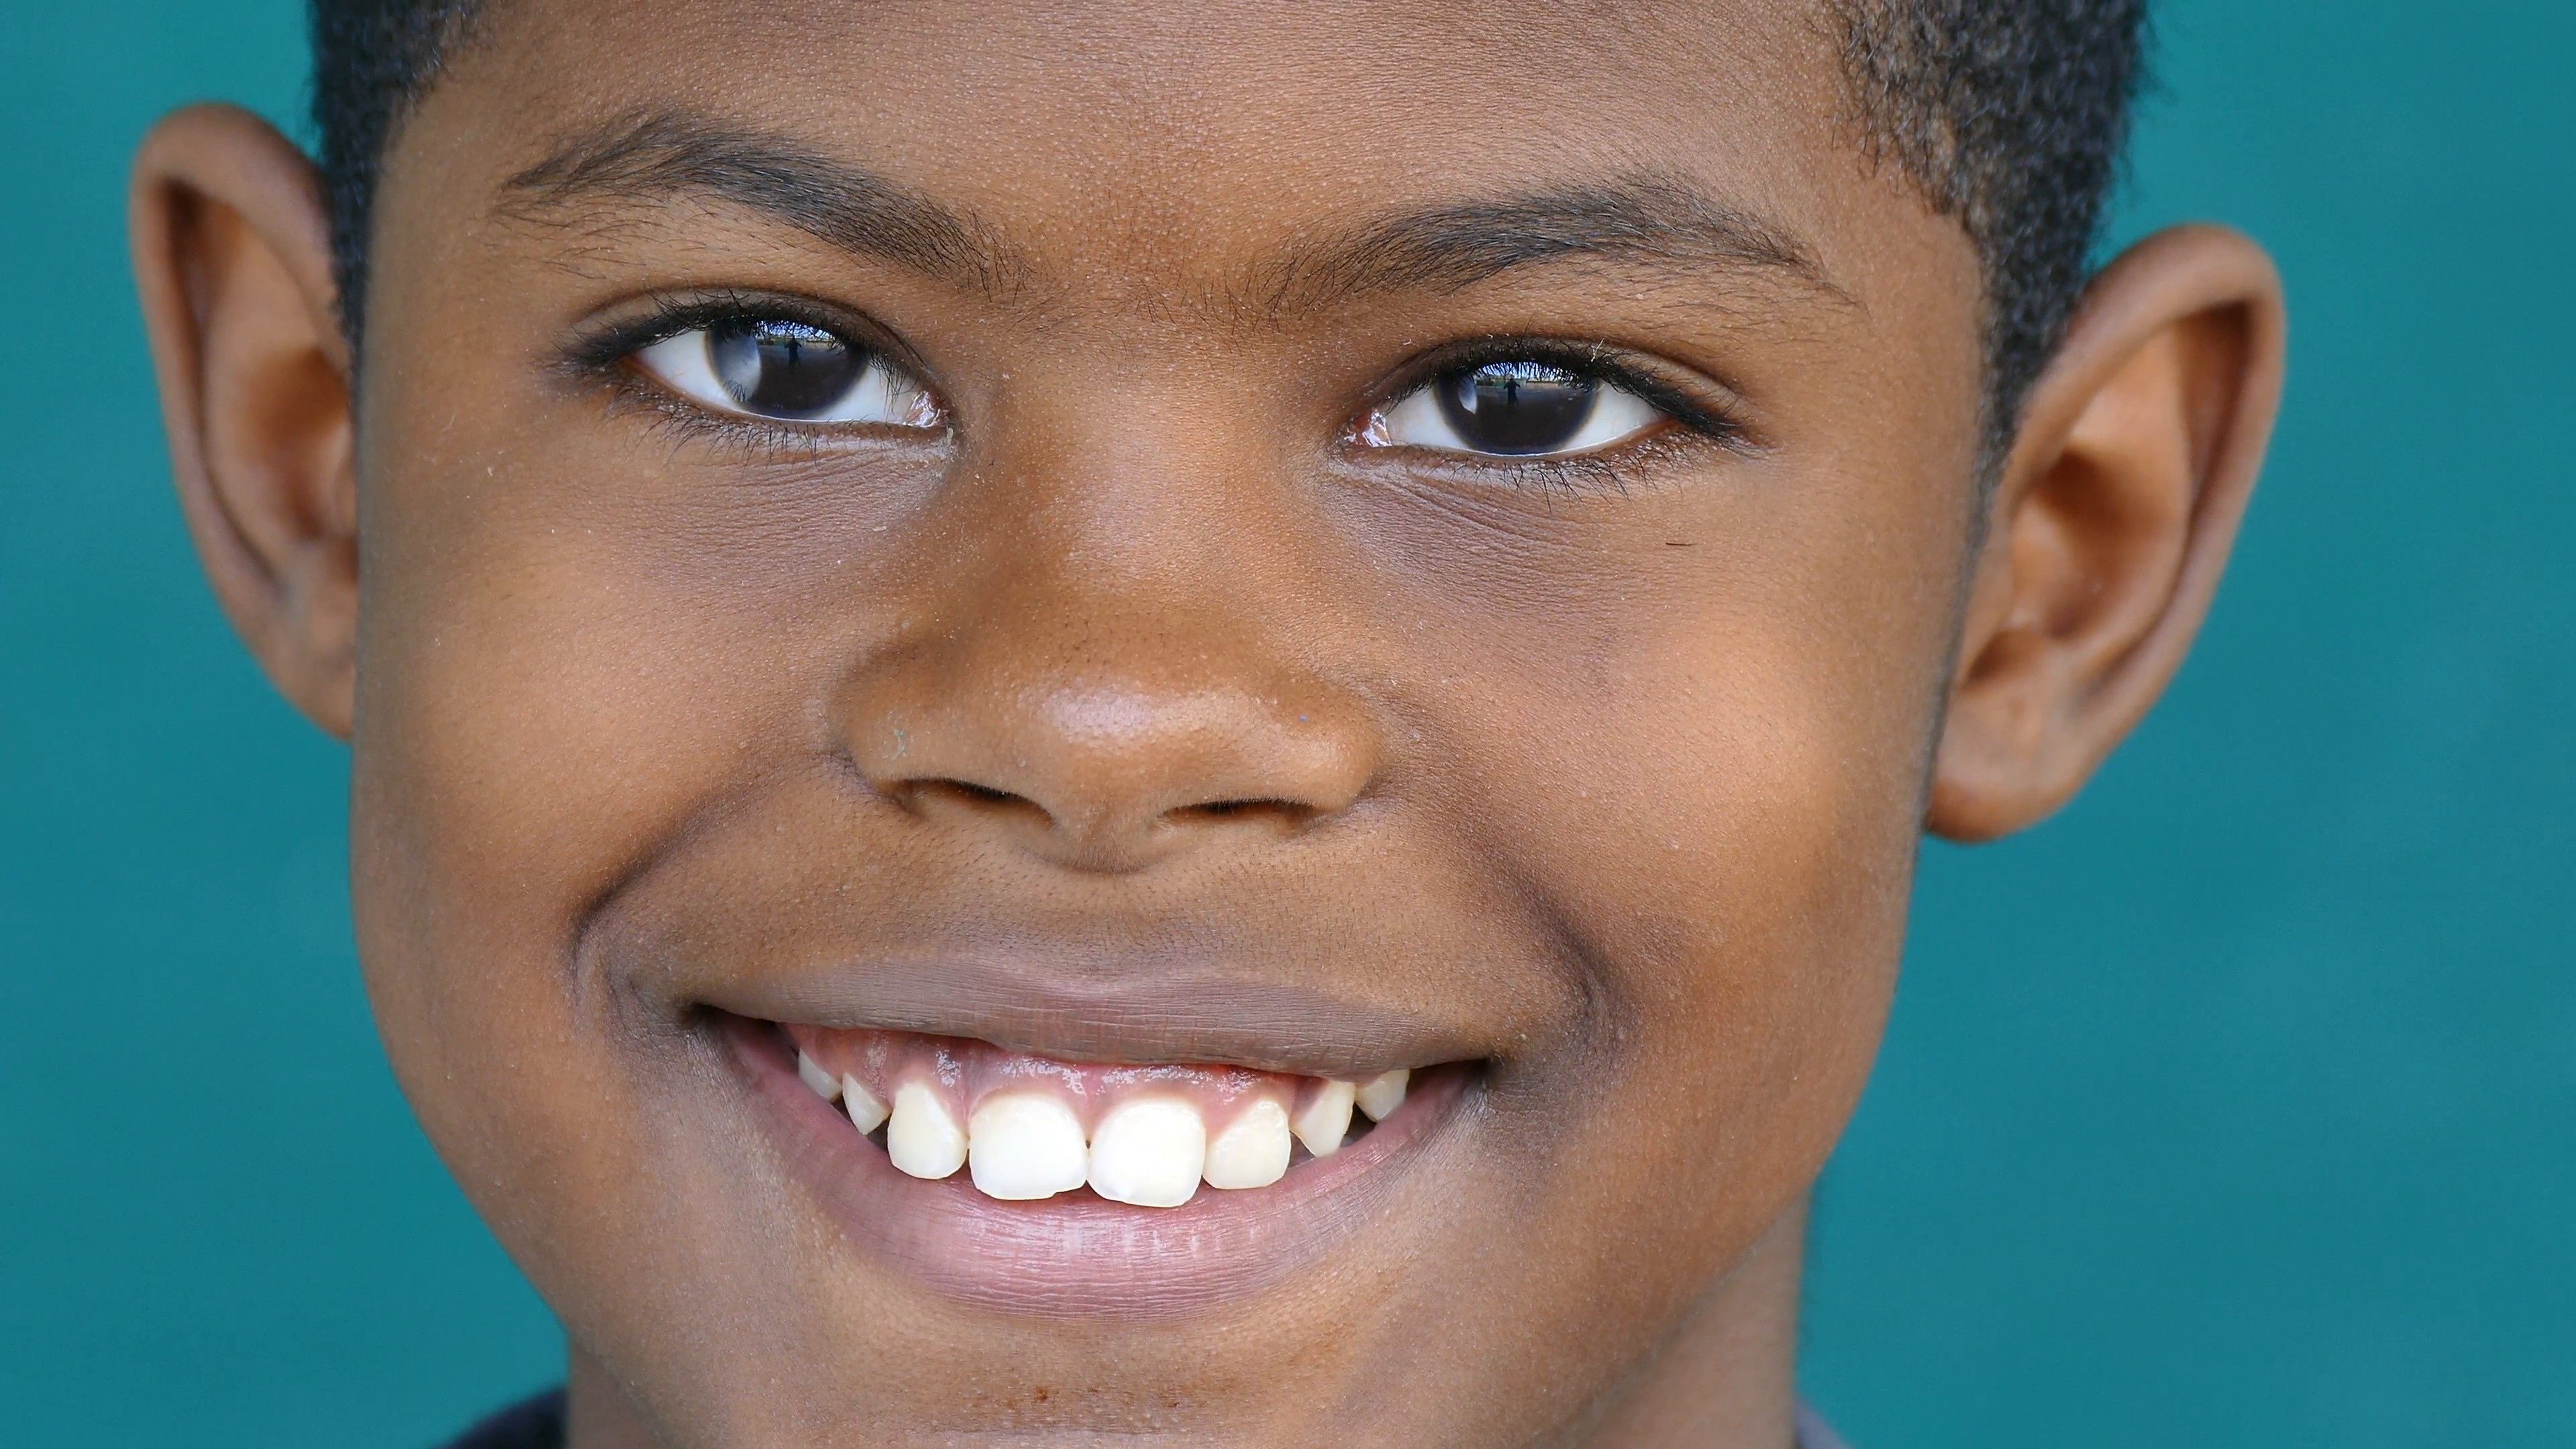 54 Black Children Portrait Happy Young Boy Smiling At Camera Stock ...